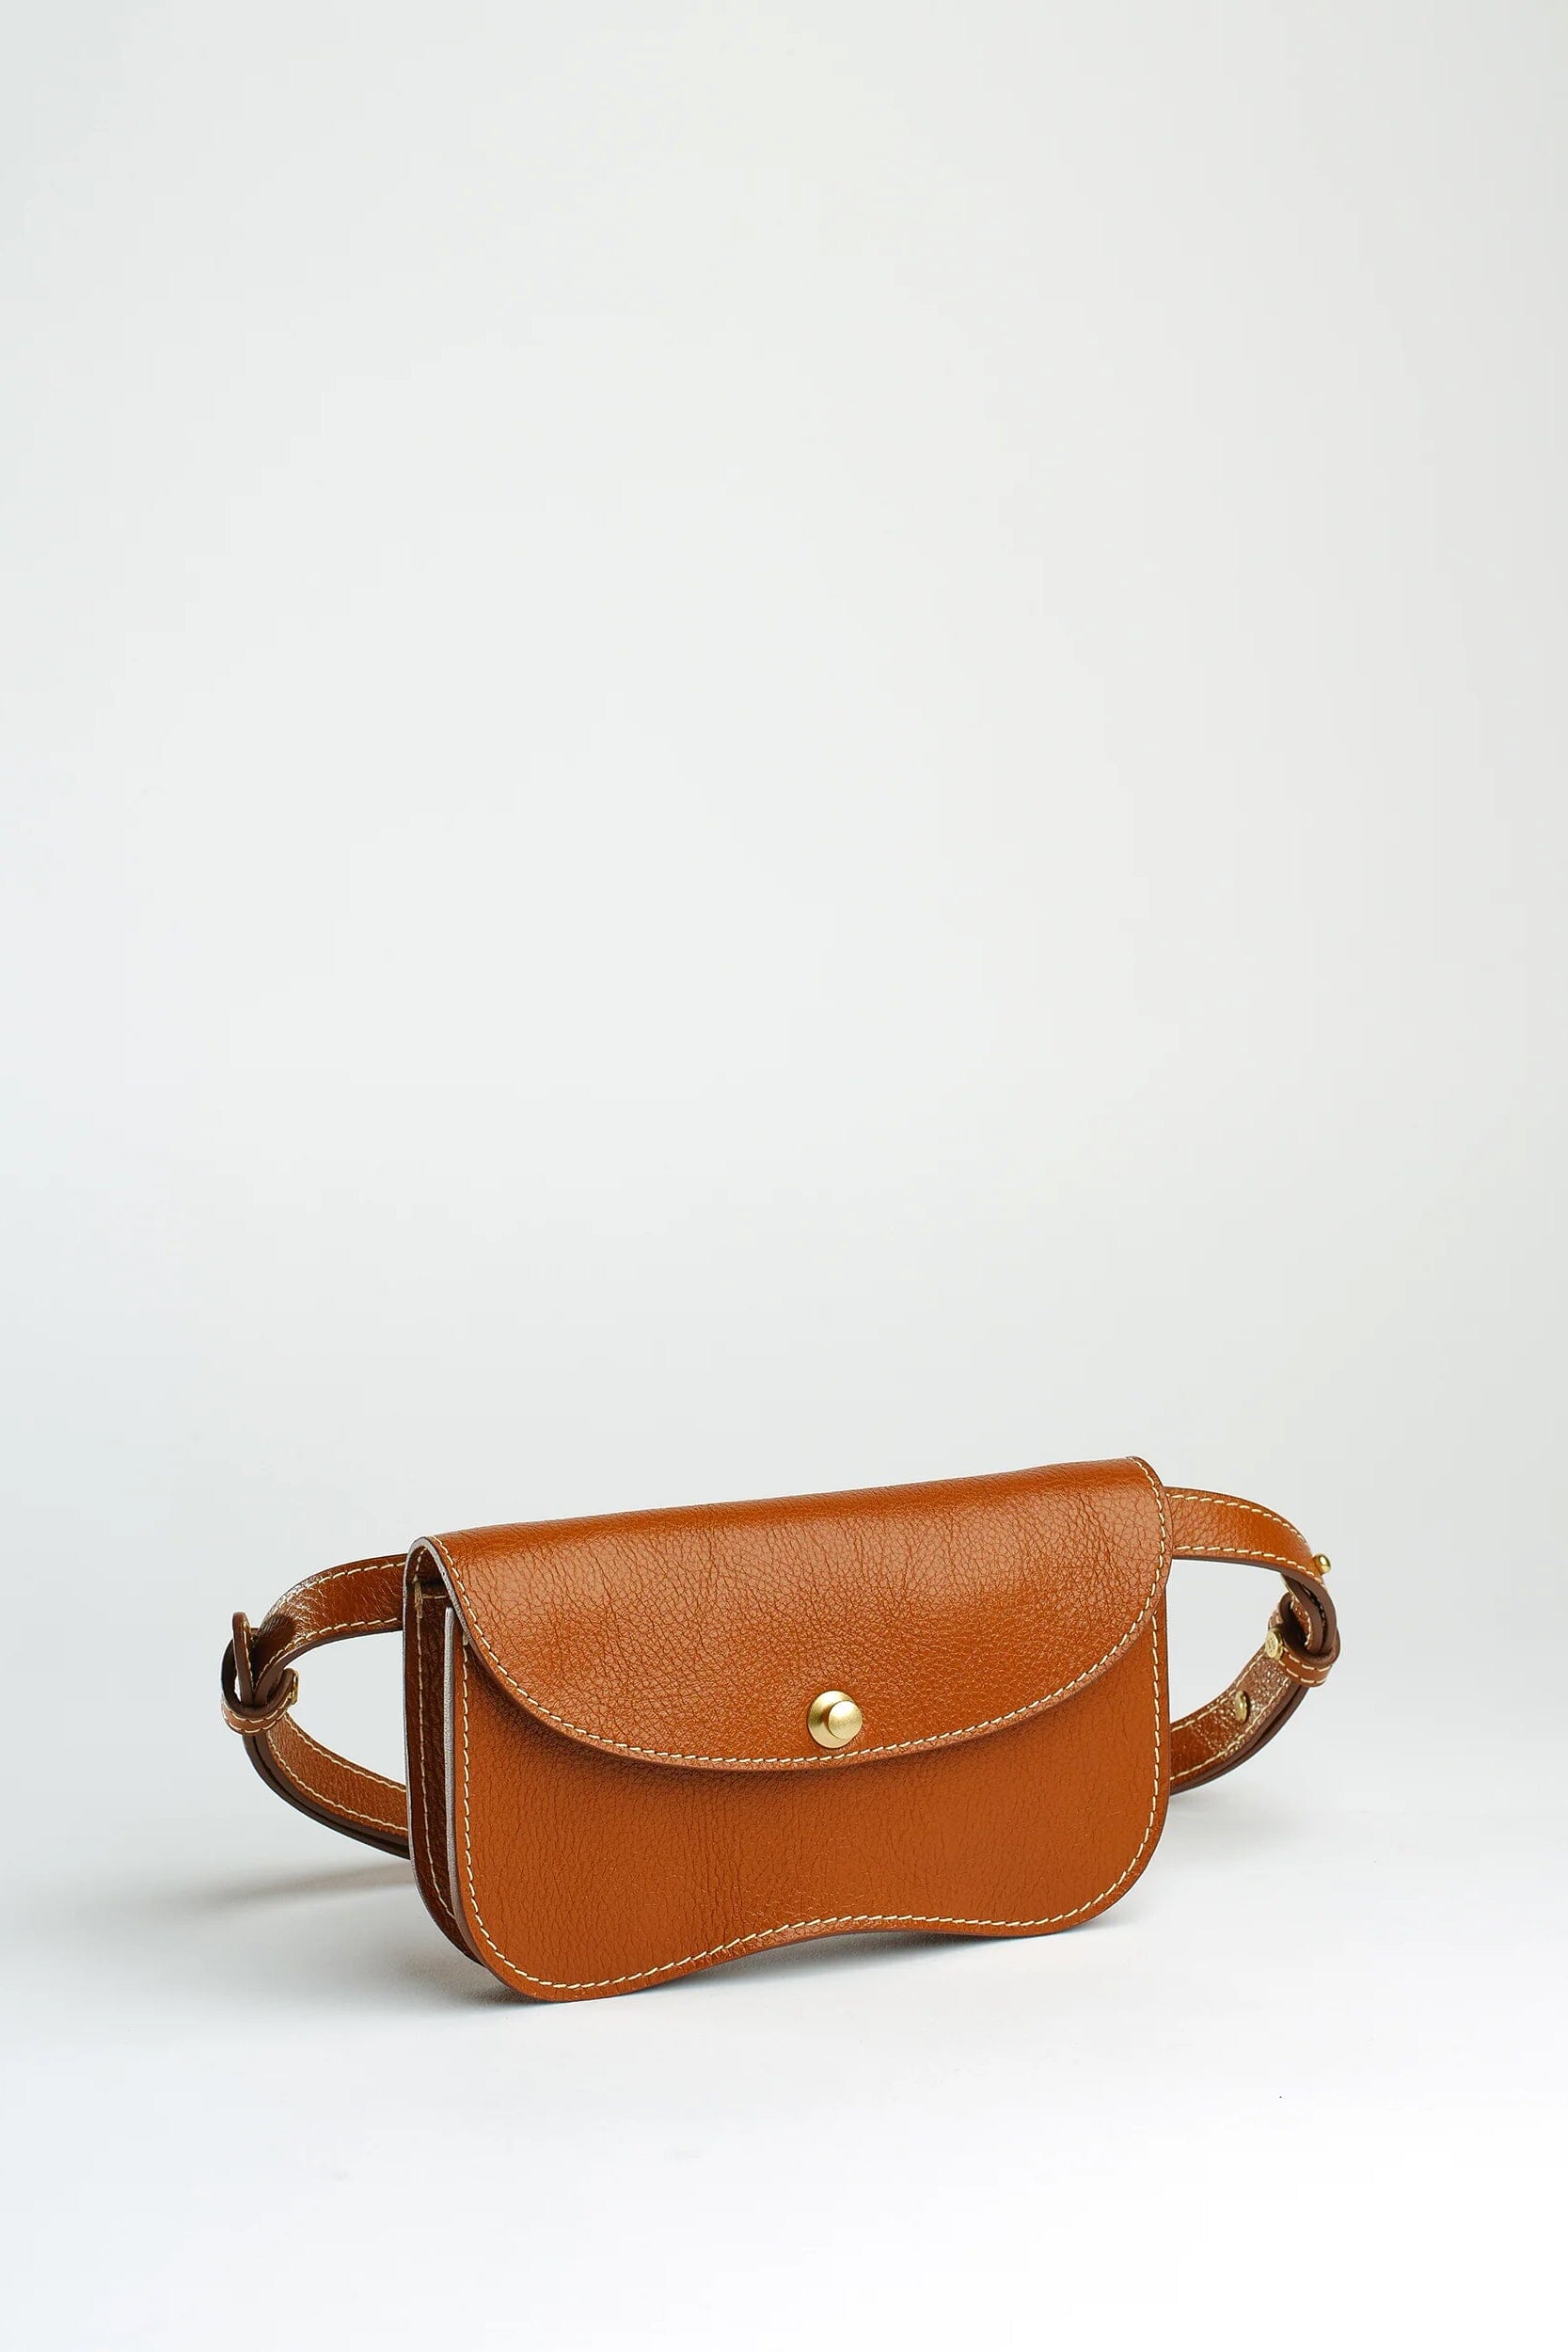 Lindquist | Faba Bag In Leather Brown - SHOP YUCCA Handbags LINDQUIST - YUCCA 